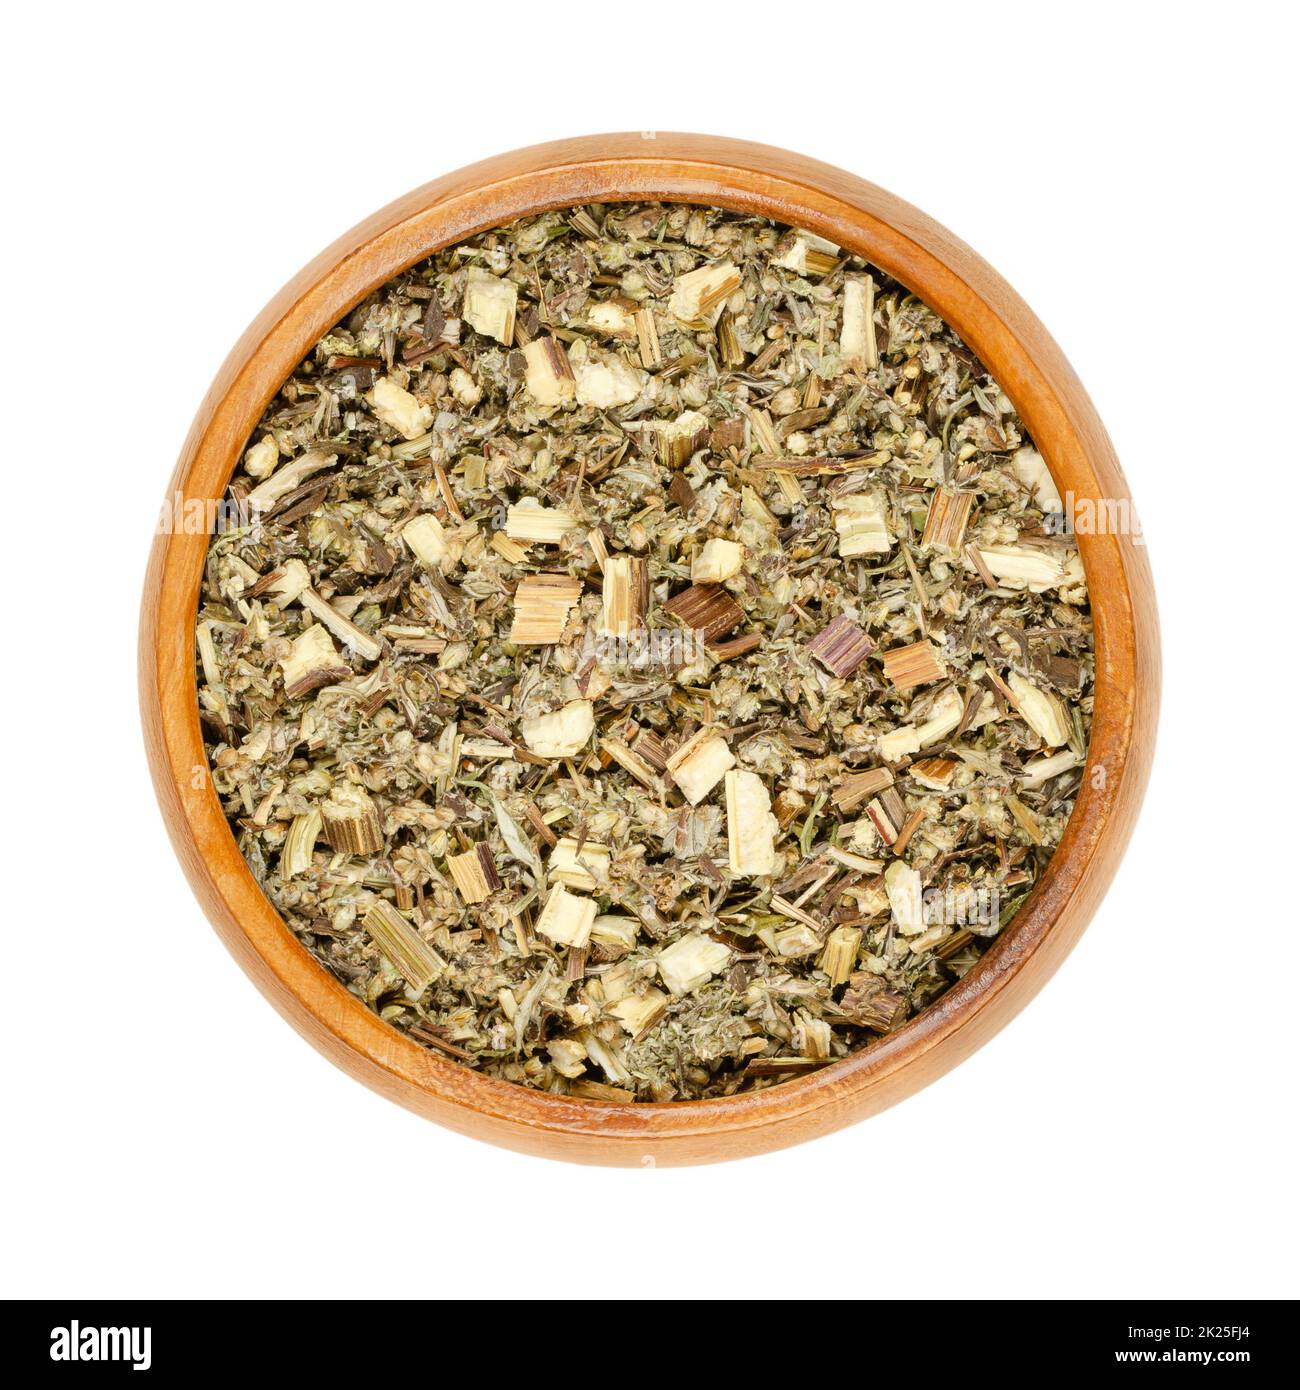 Mugwort herb, dried and cut riverside wormwood, in a wooden bowl Stock Photo